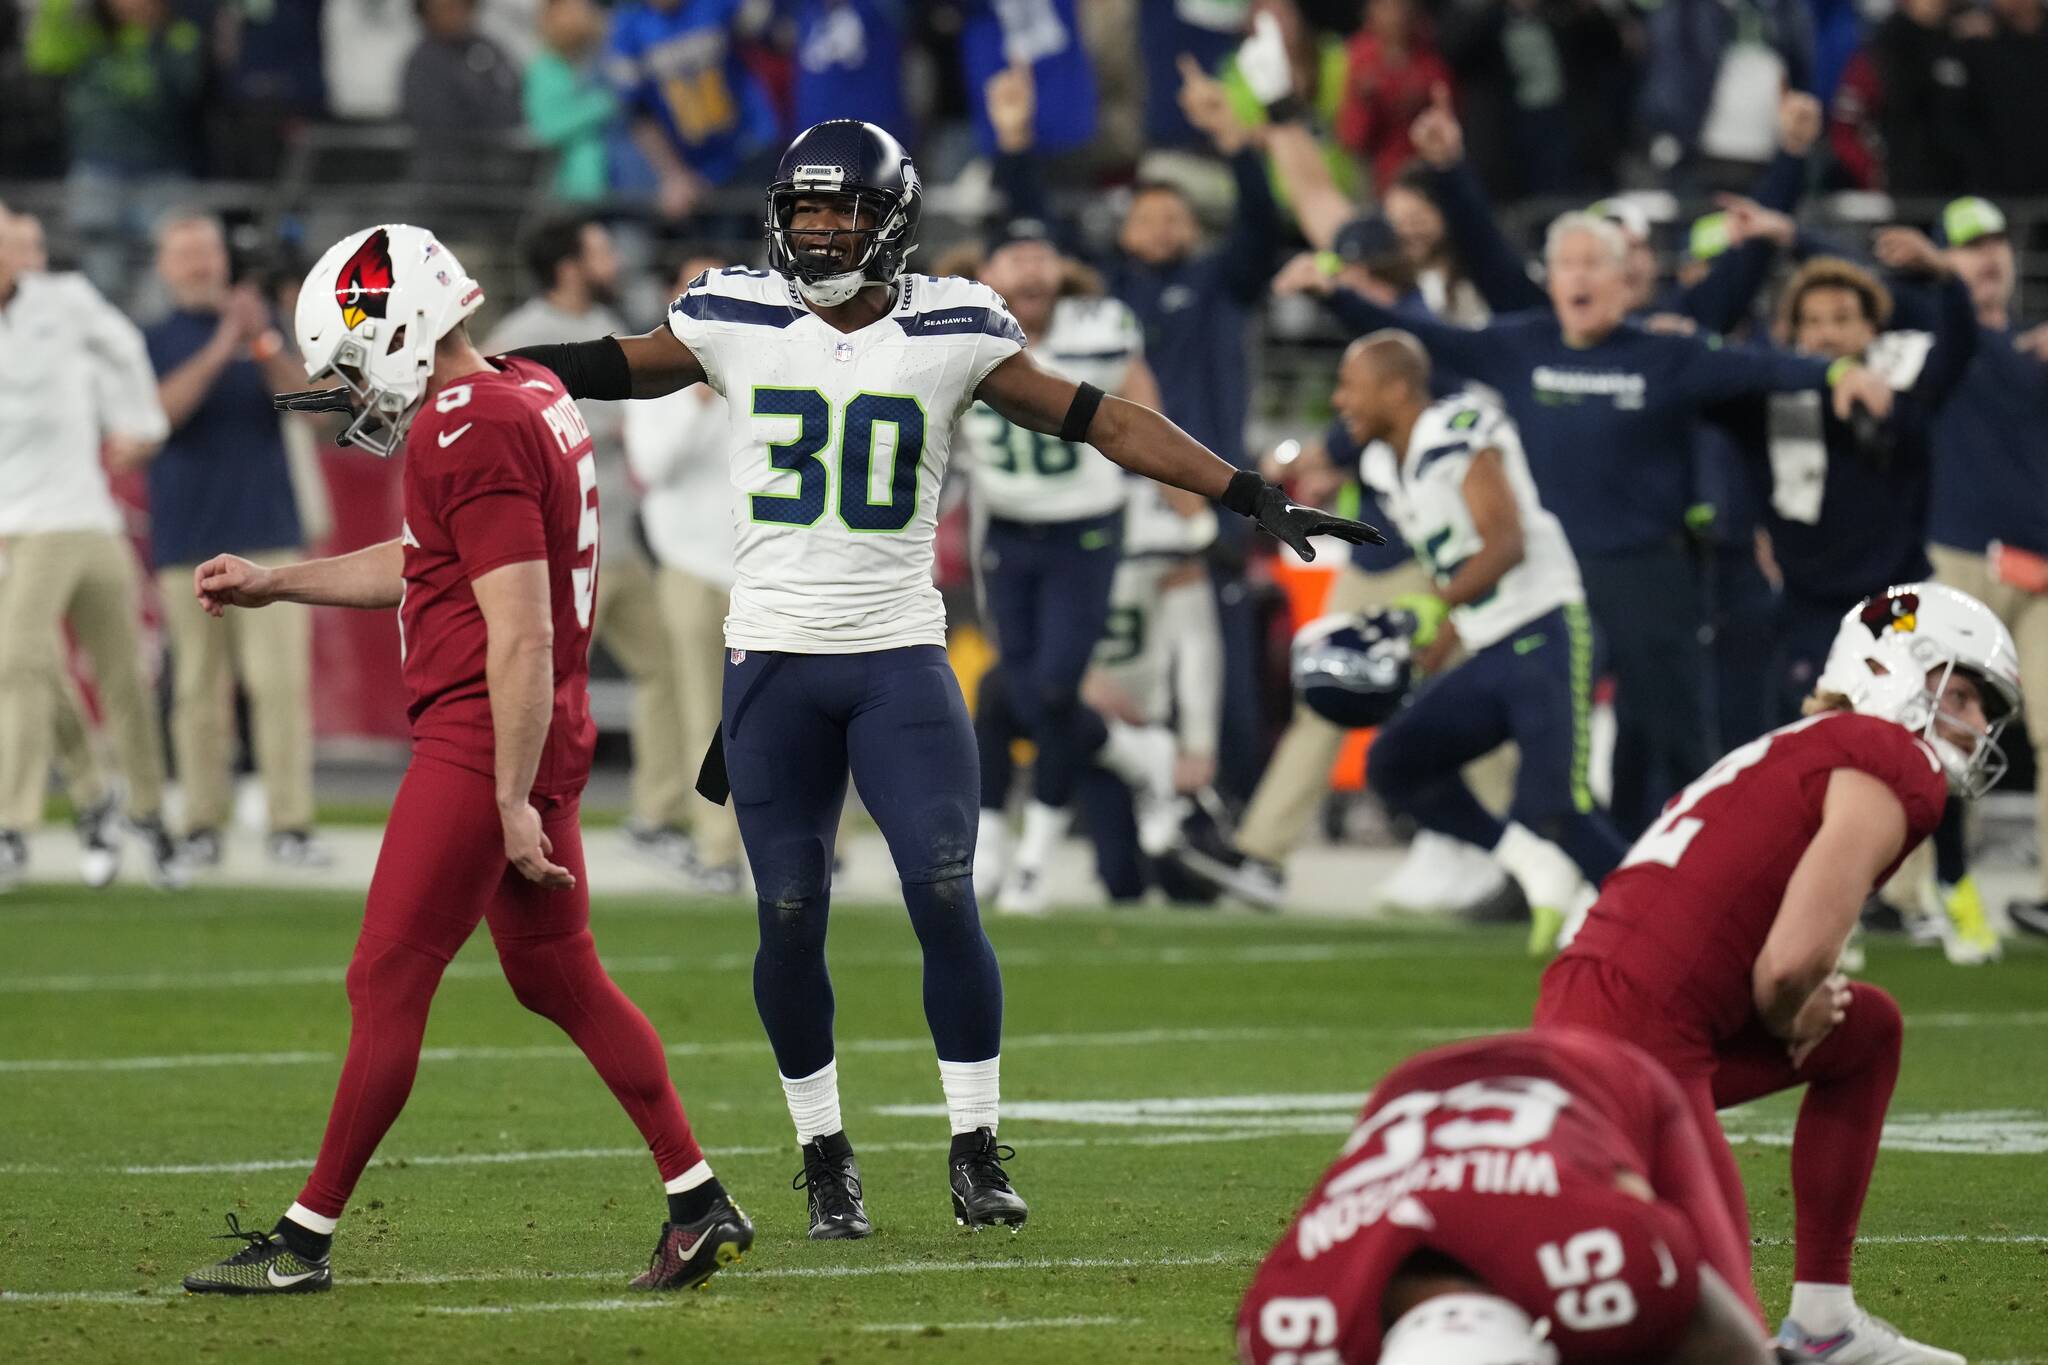 Seattle Seahawks cornerback Michael Jackson (30) celebrates as Arizona Cardinals place kicker Matt Prater (5) walks off the field after missing a 51-yard field-goal attempt as time runs out in the fourth quarter of Sunday’s game in Glendale, Ariz. The Seahawks won 21-20. (AP Photo/Ross D. Franklin)